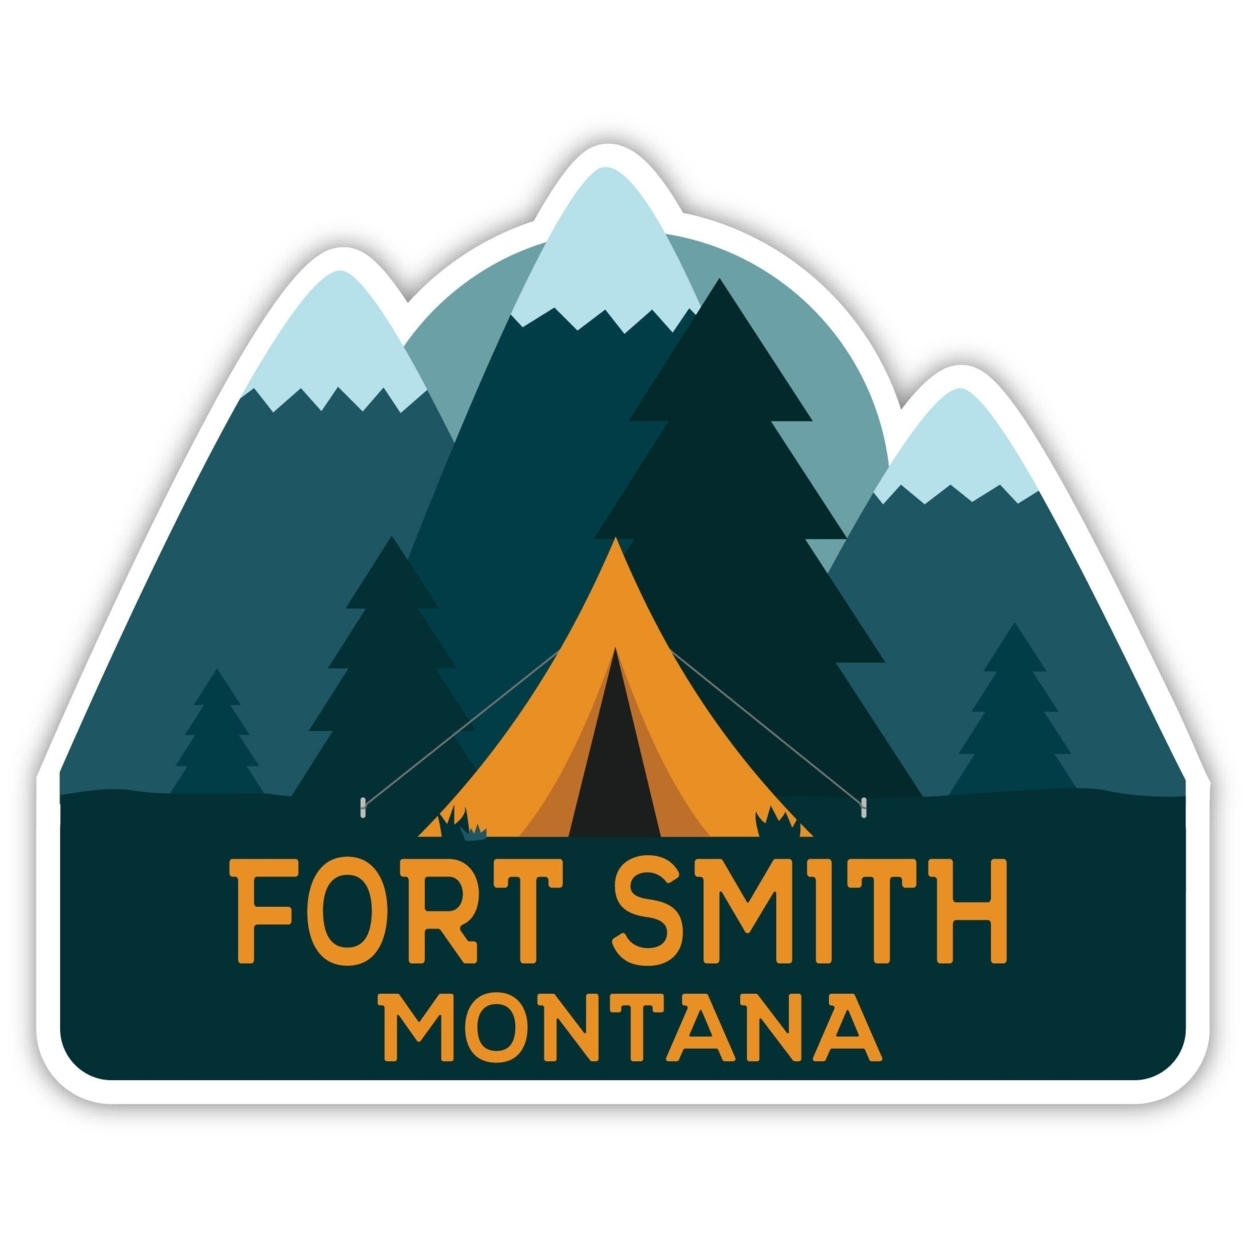 Fort Smith Montana Souvenir Decorative Stickers (Choose Theme And Size) - 4-Pack, 2-Inch, Bear